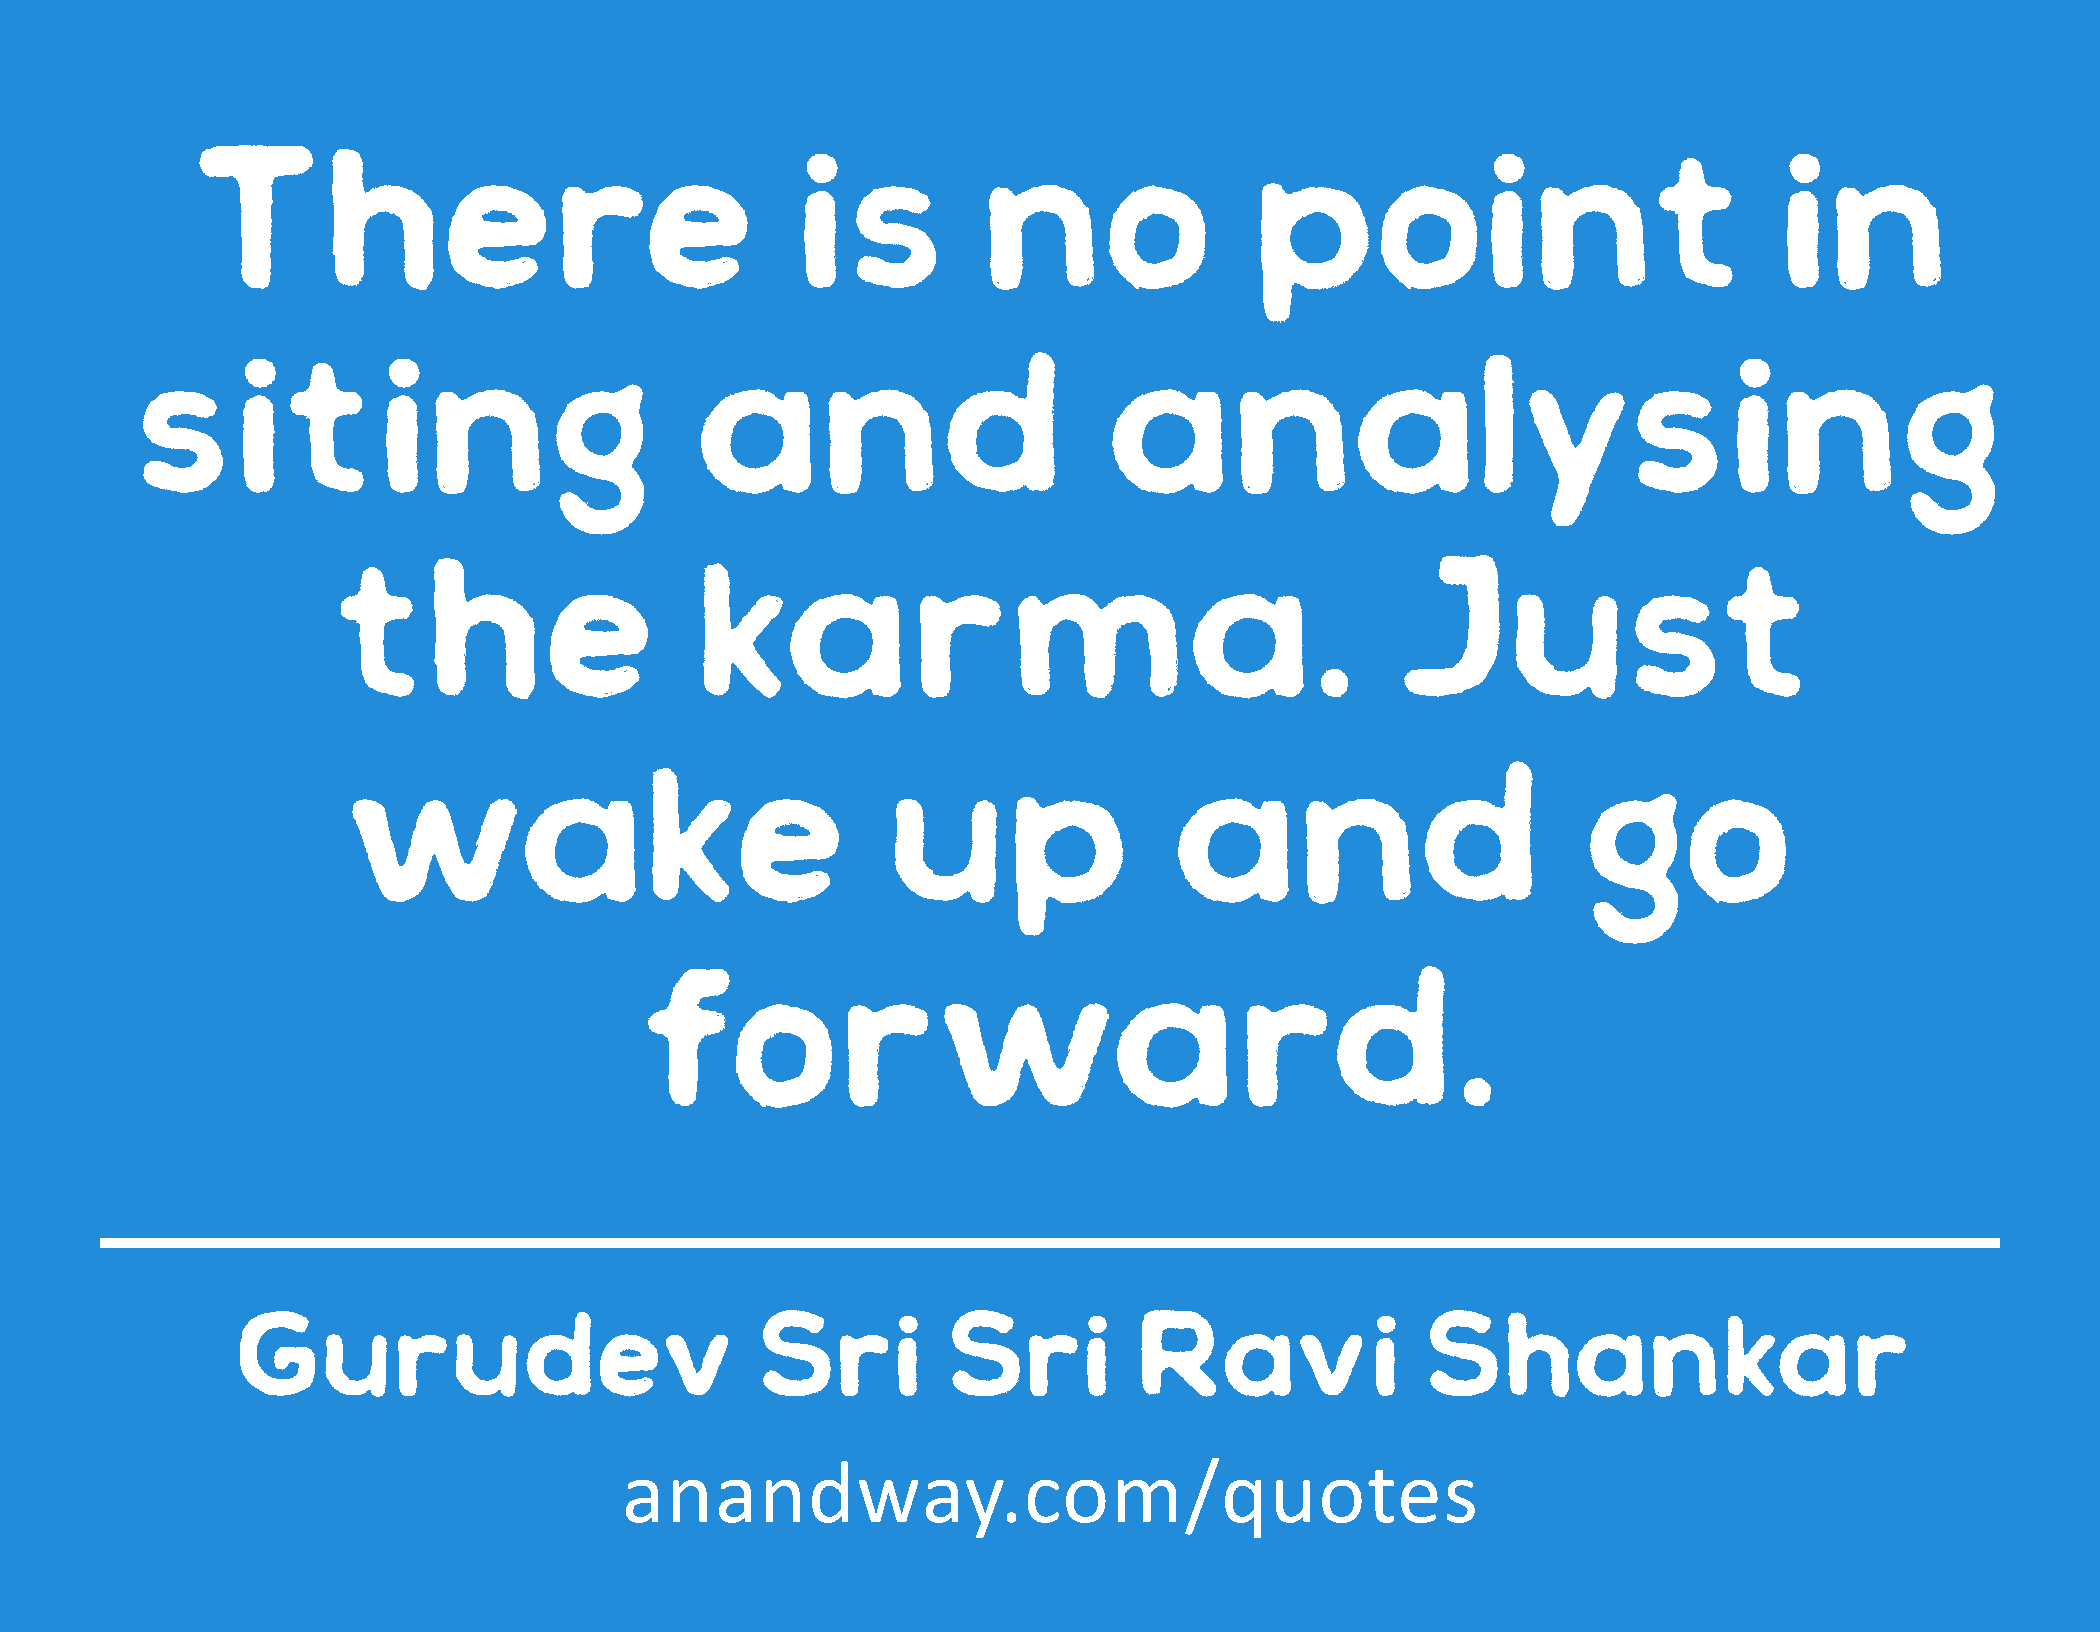 There is no point in siting and analysing the karma. Just wake up and go forward. 
 -Gurudev Sri Sri Ravi Shankar